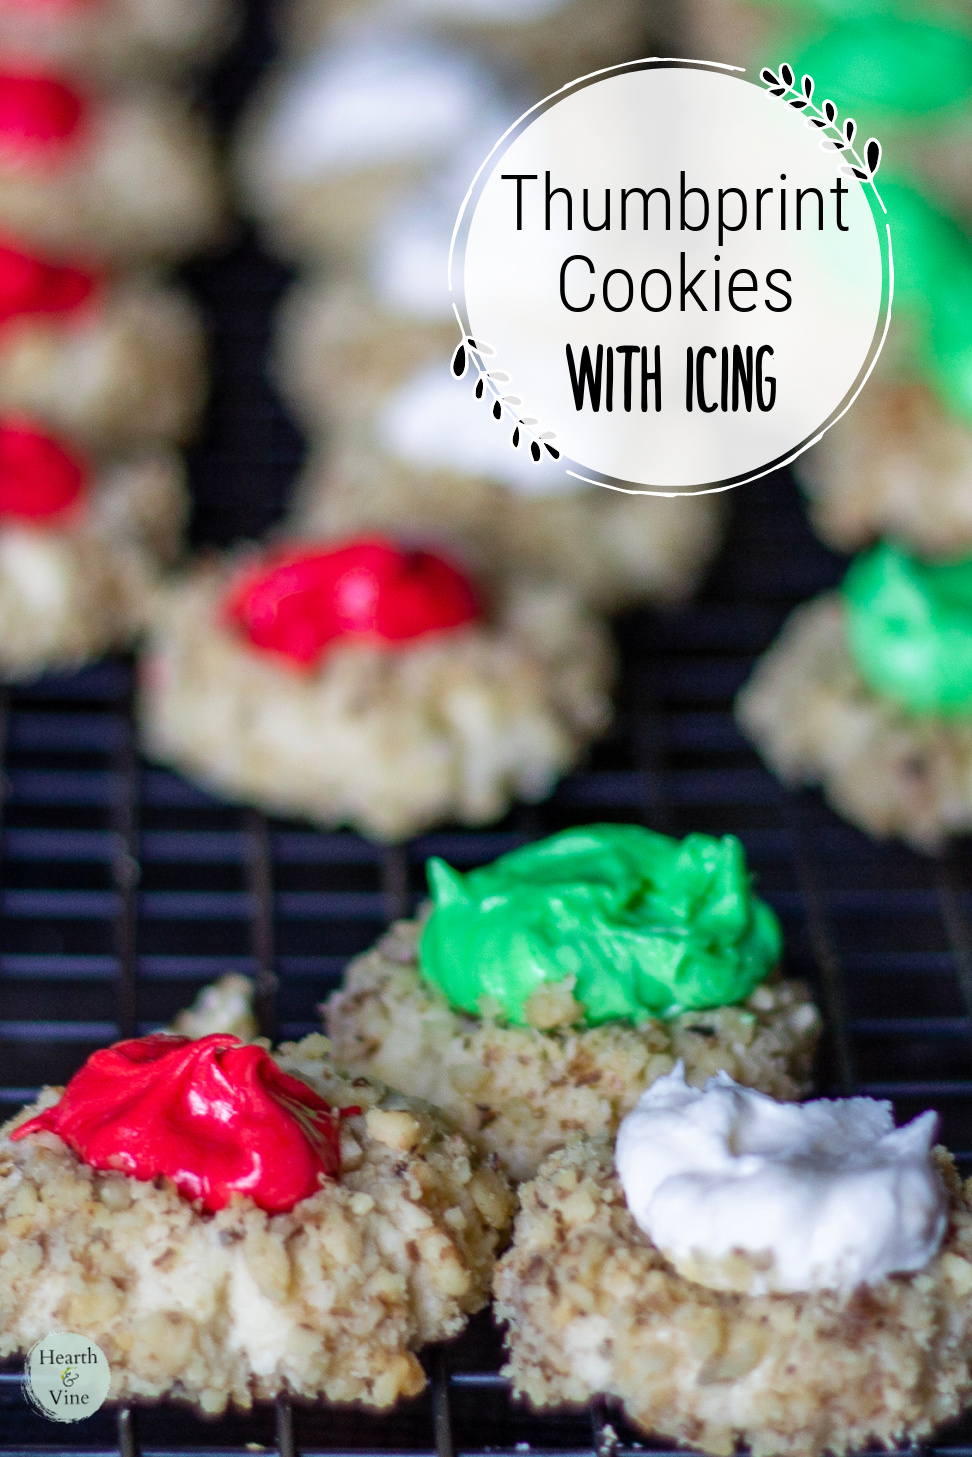 Thumbprint cookies with icing in red, green and white.